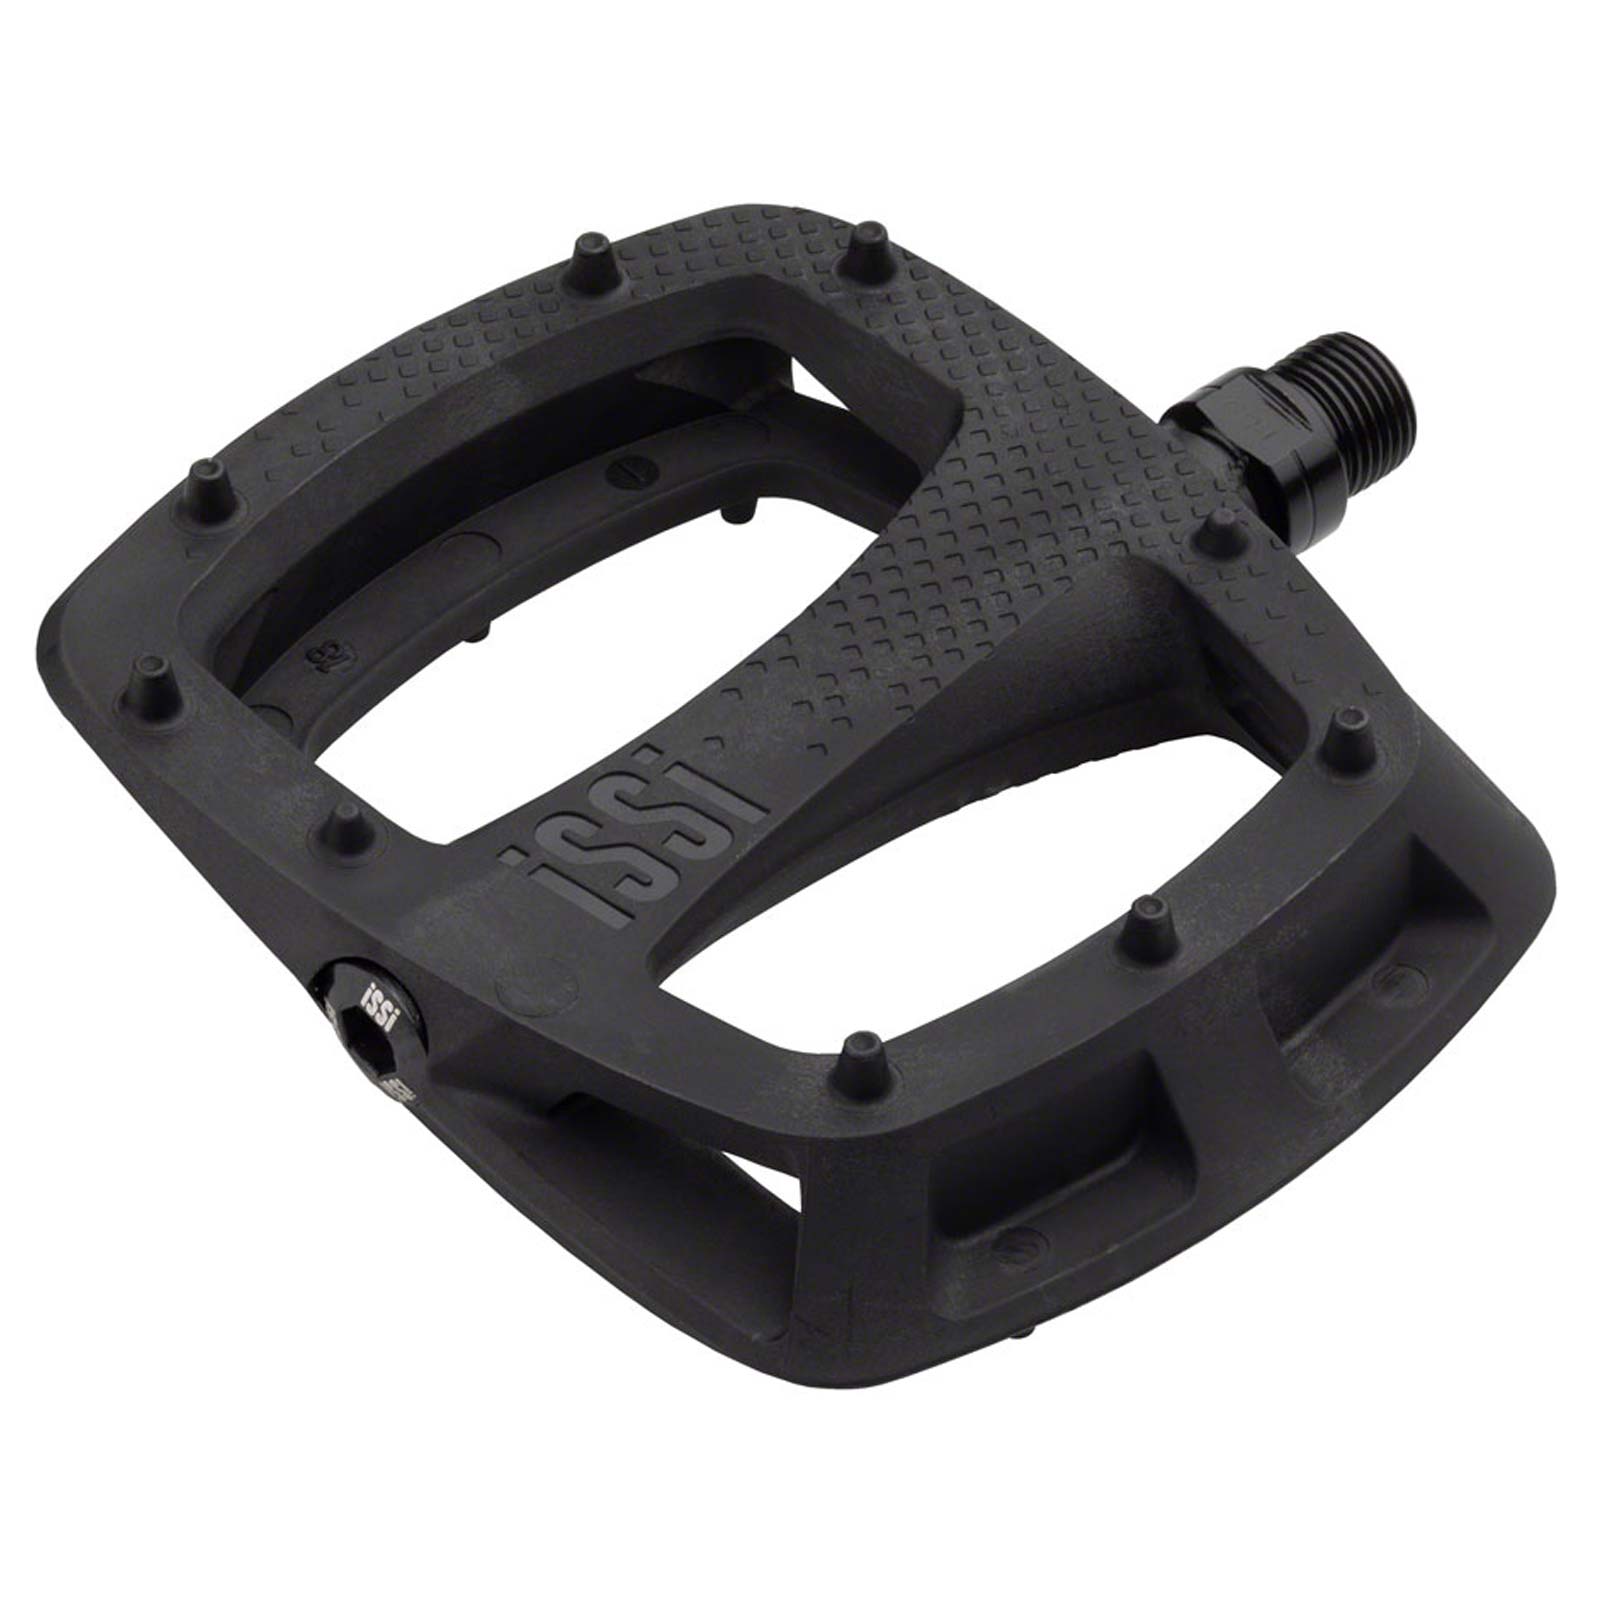 iSSi Thump Composite Flat Pedals with 